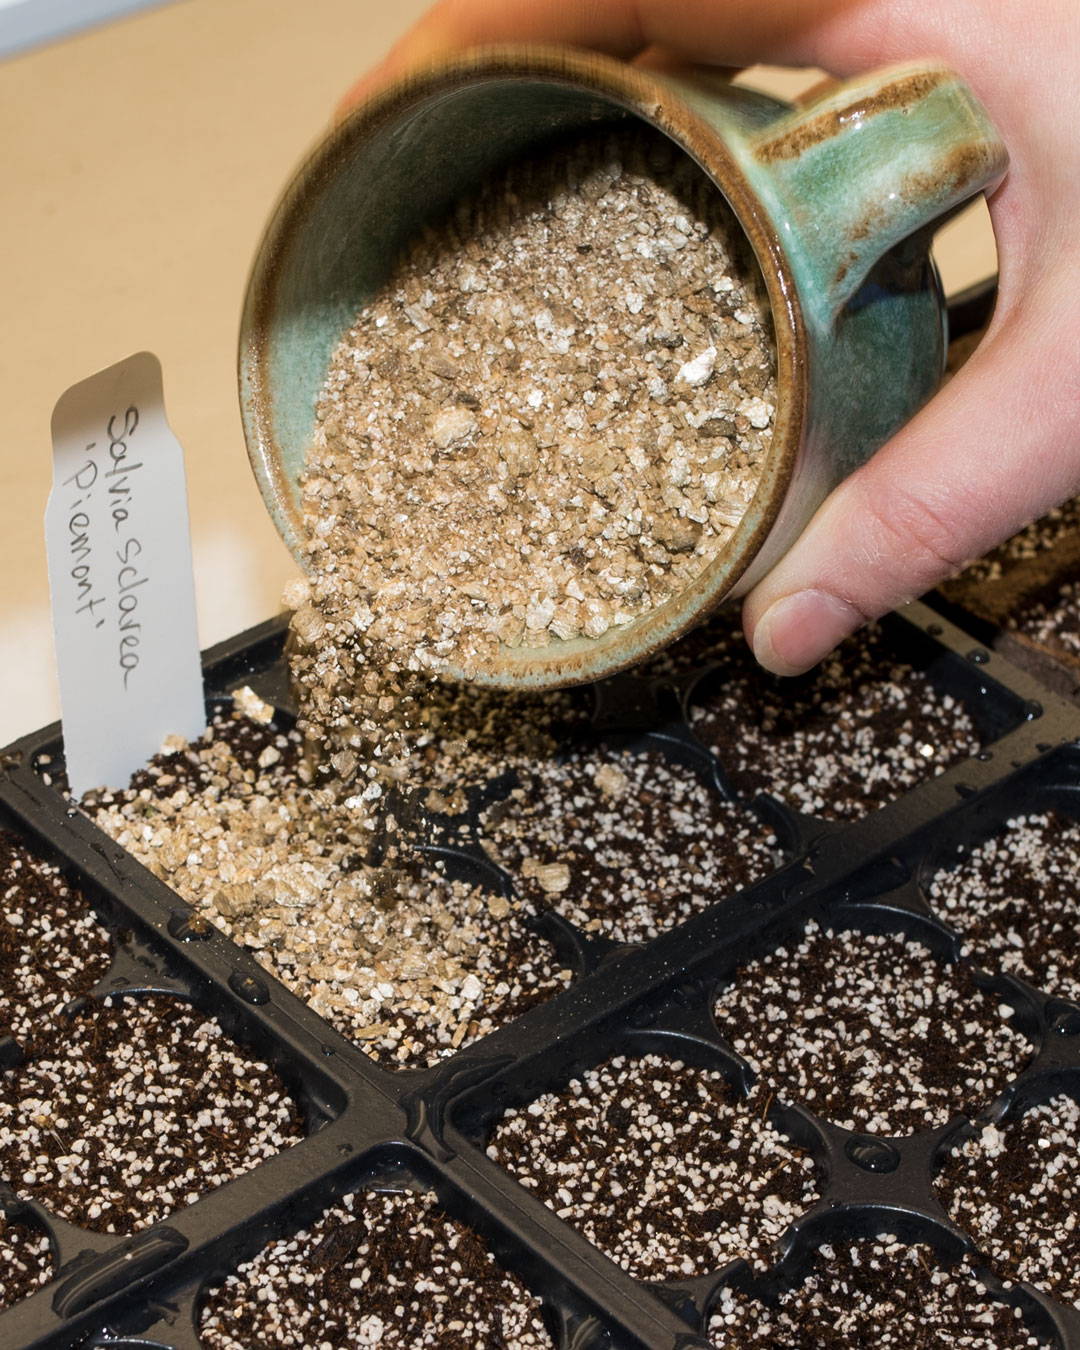 Sprinkling vermiculite over the surface